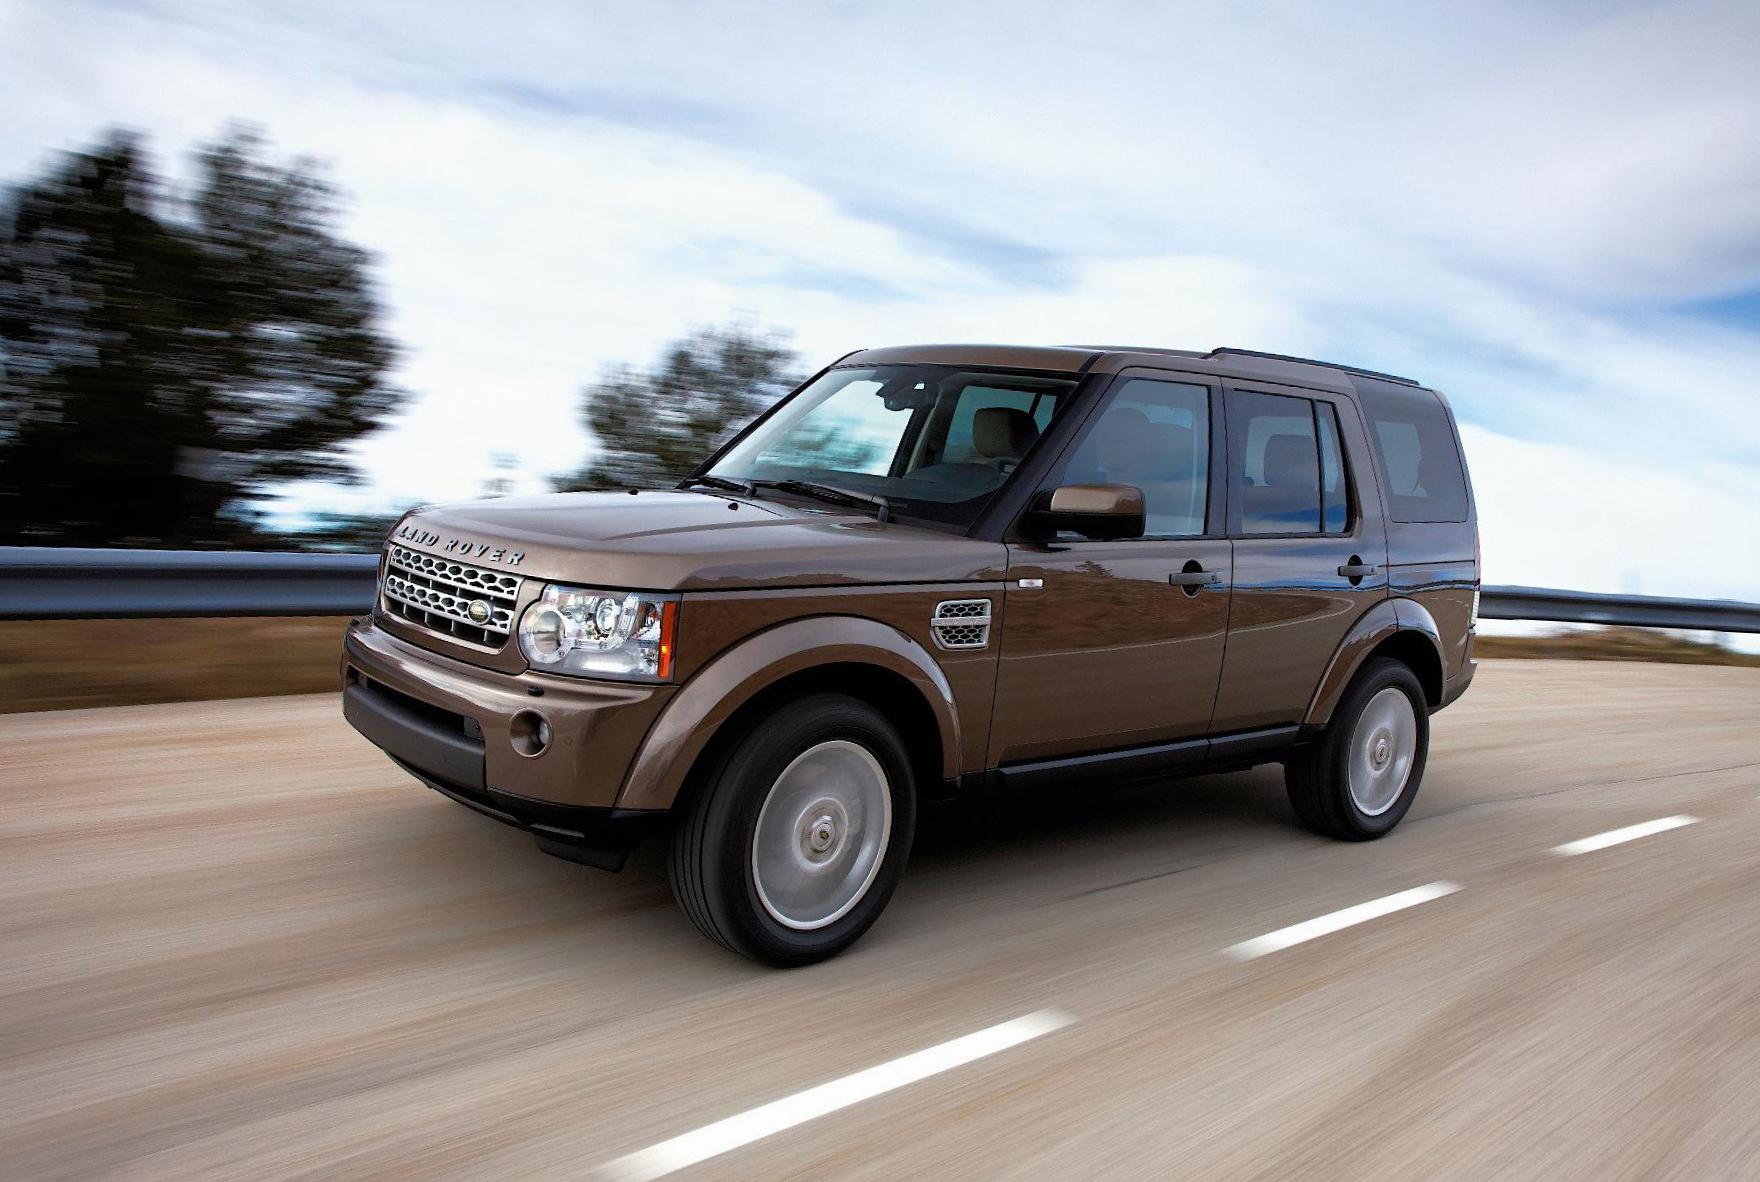 Discovery 4 Land Rover models 2010